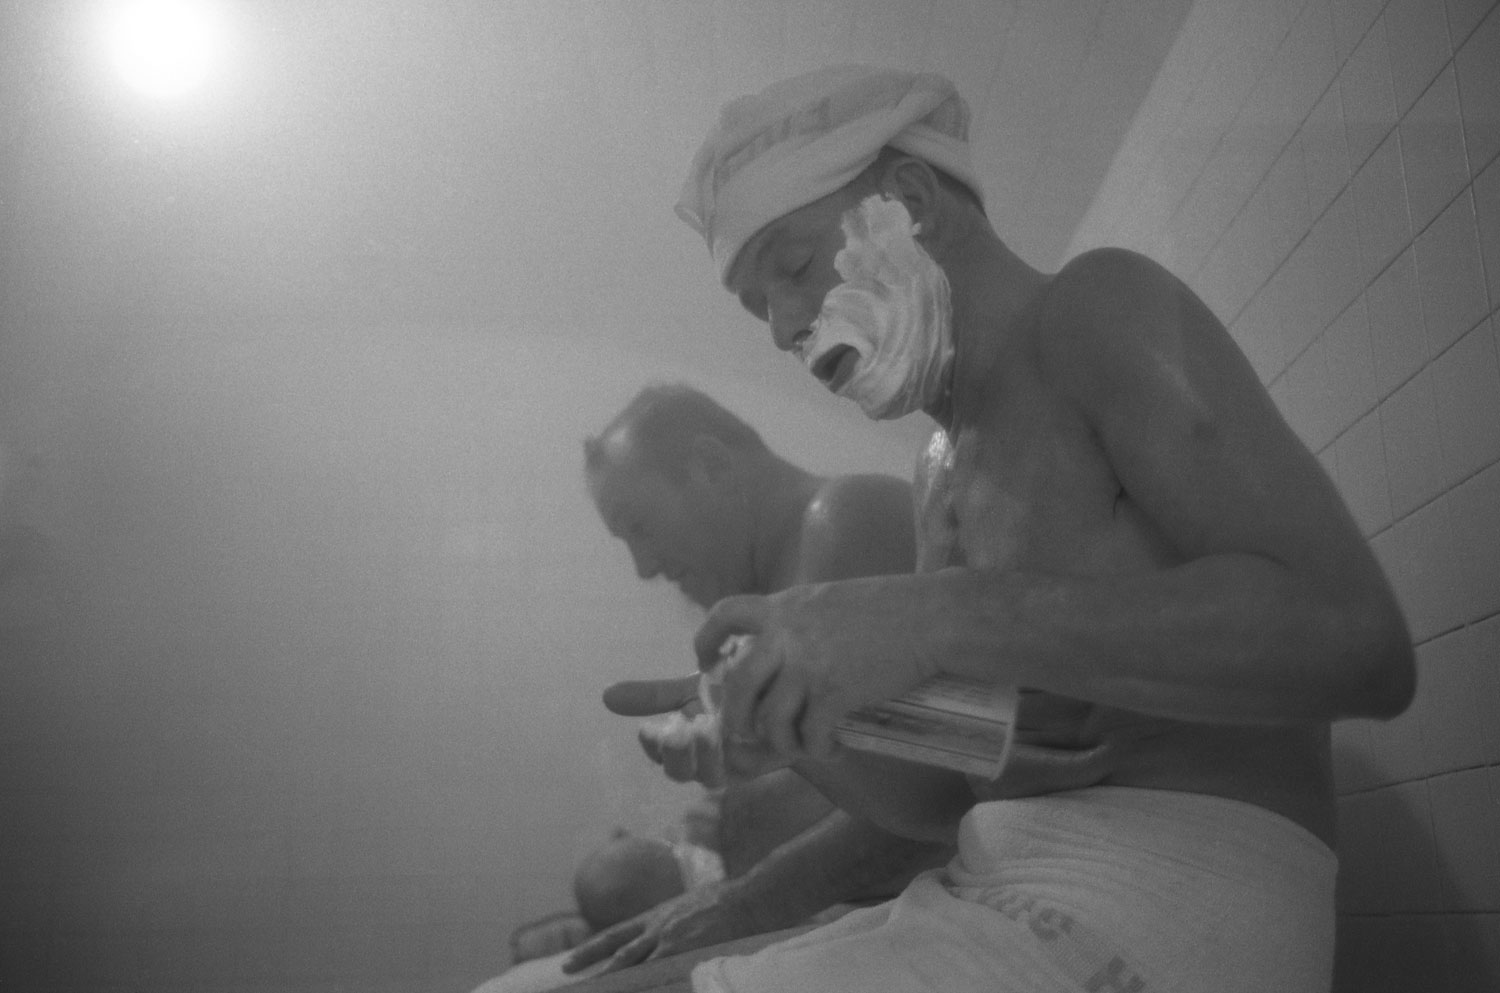 Frank Sinatra shaves in a steam room in Miami. He is wearing a towel around his waste and on his head. His face is covered with shaving cream.